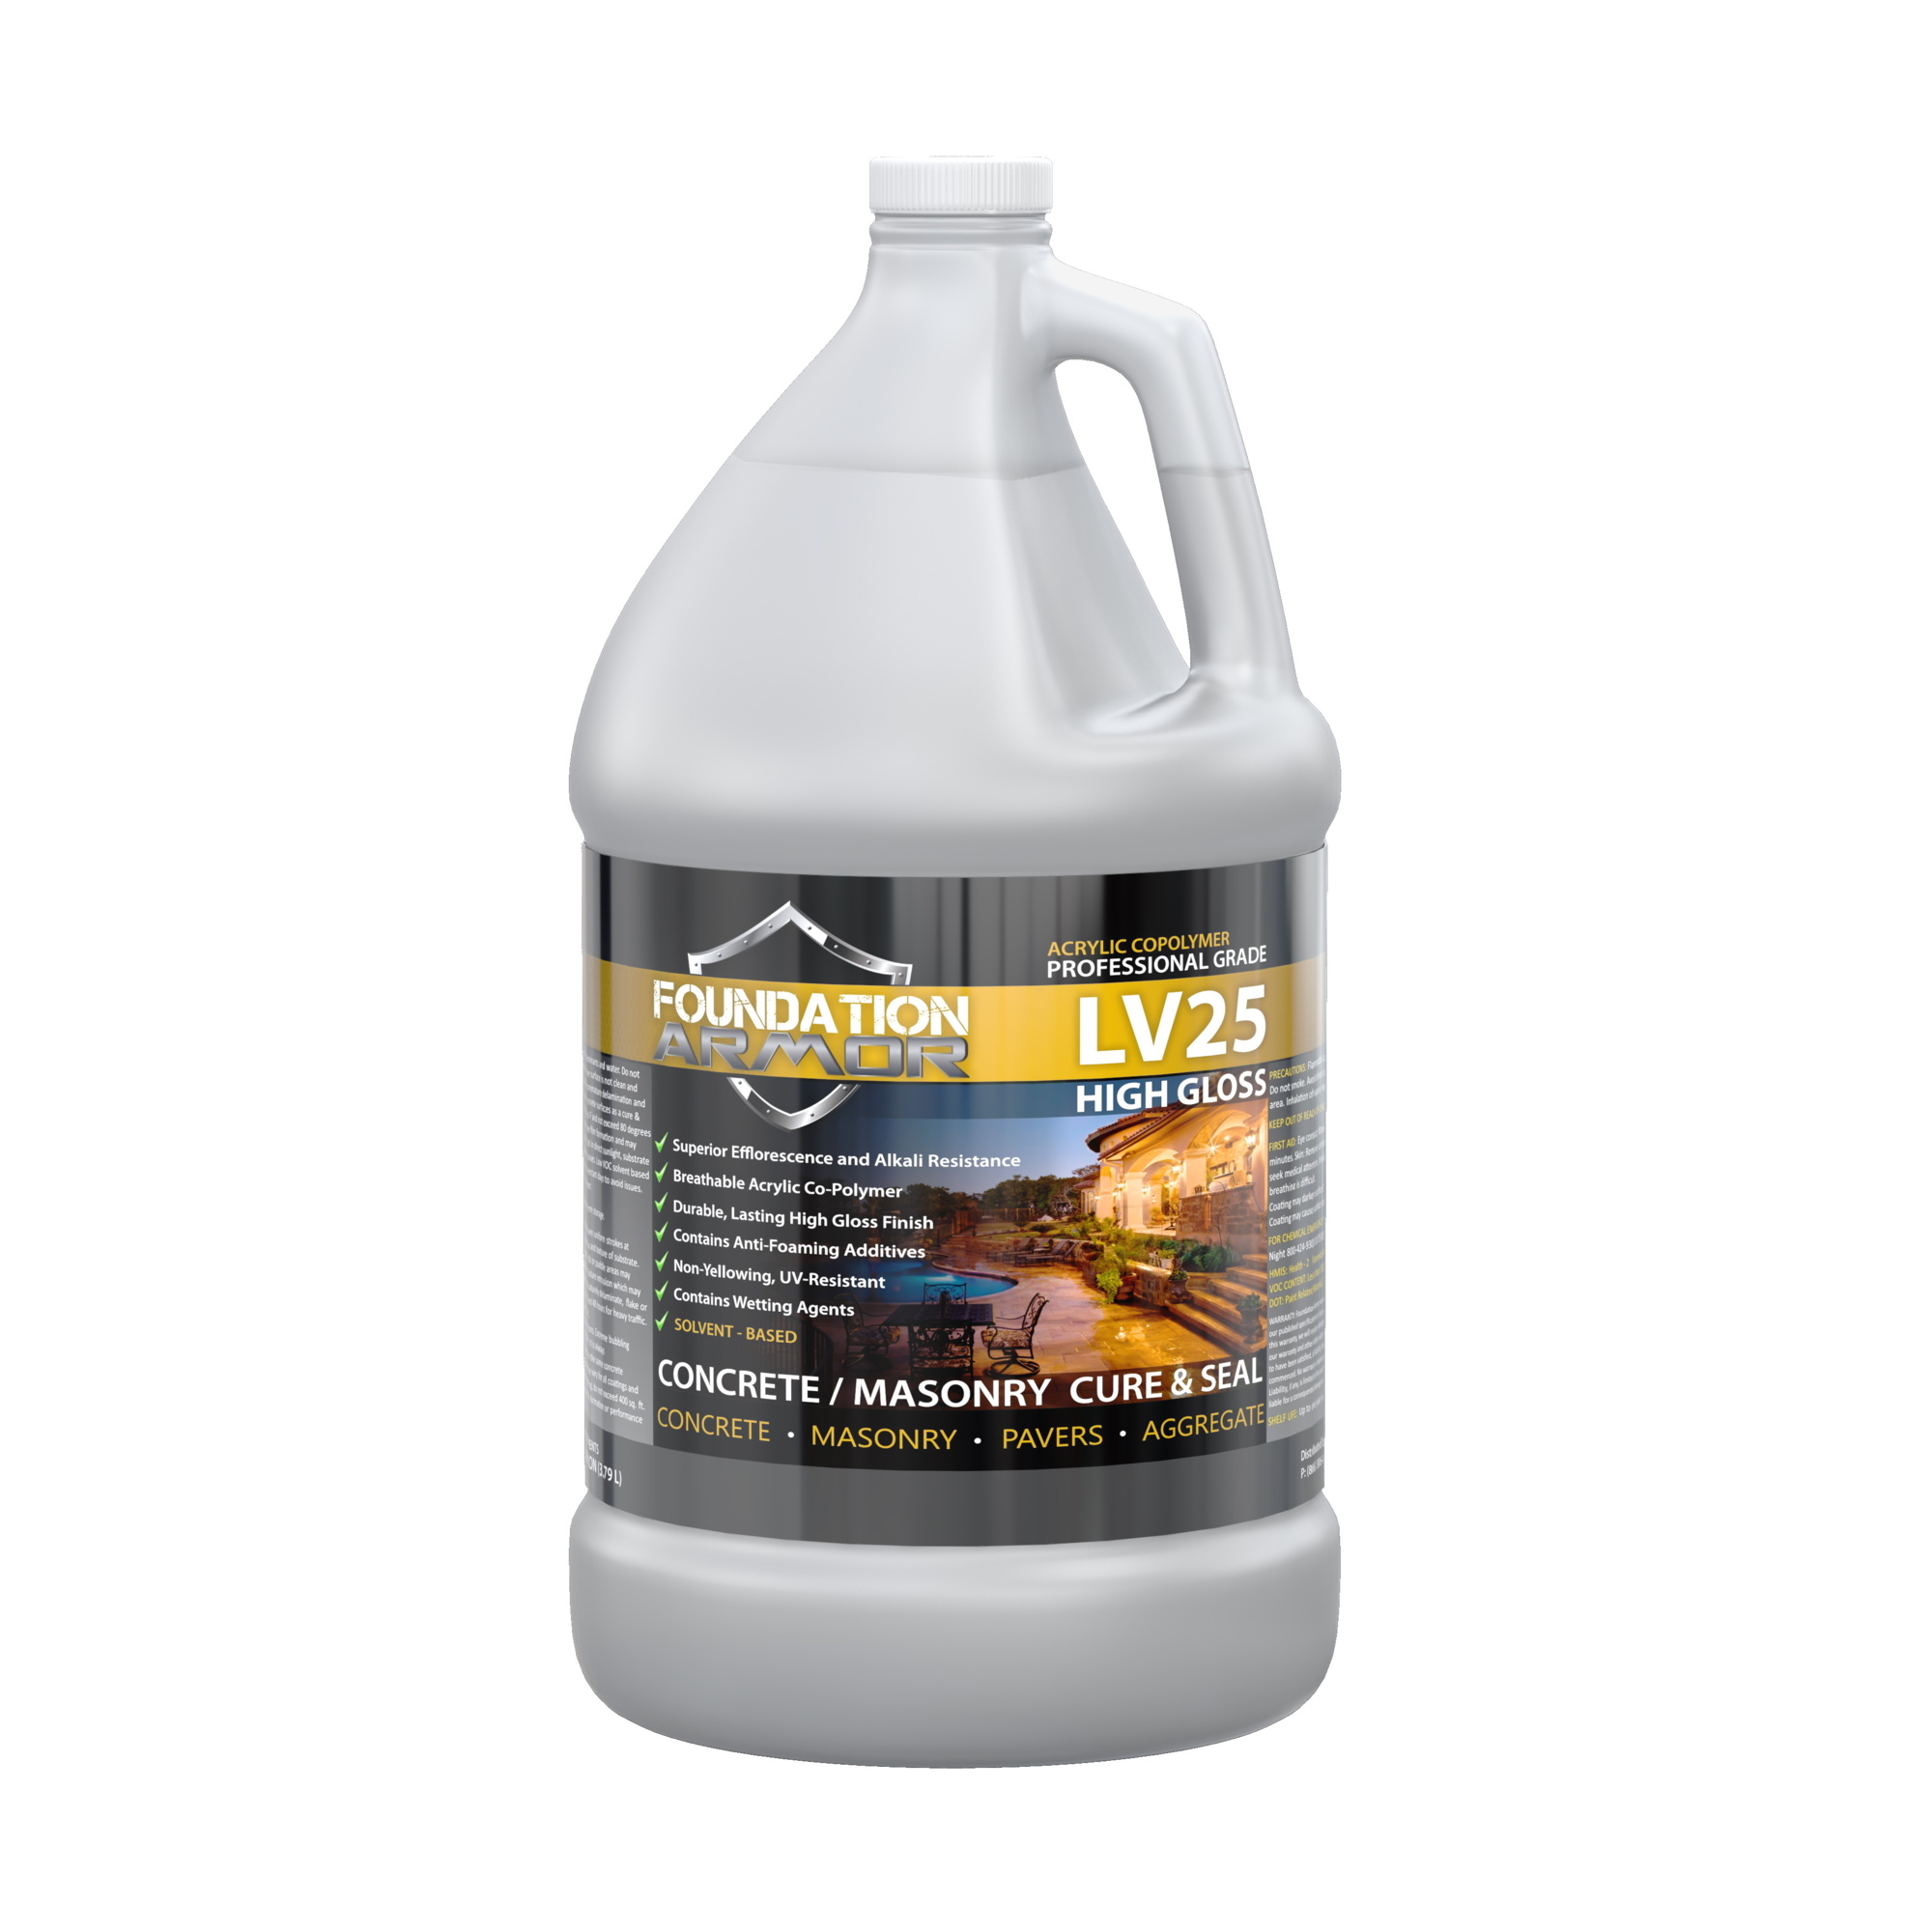 Foundation Armor, High Gloss Concrete Cure and Seal, Container Size 1 Gallon, Color Clear, Application Method Sprayer or Roller, Model LV251GAL